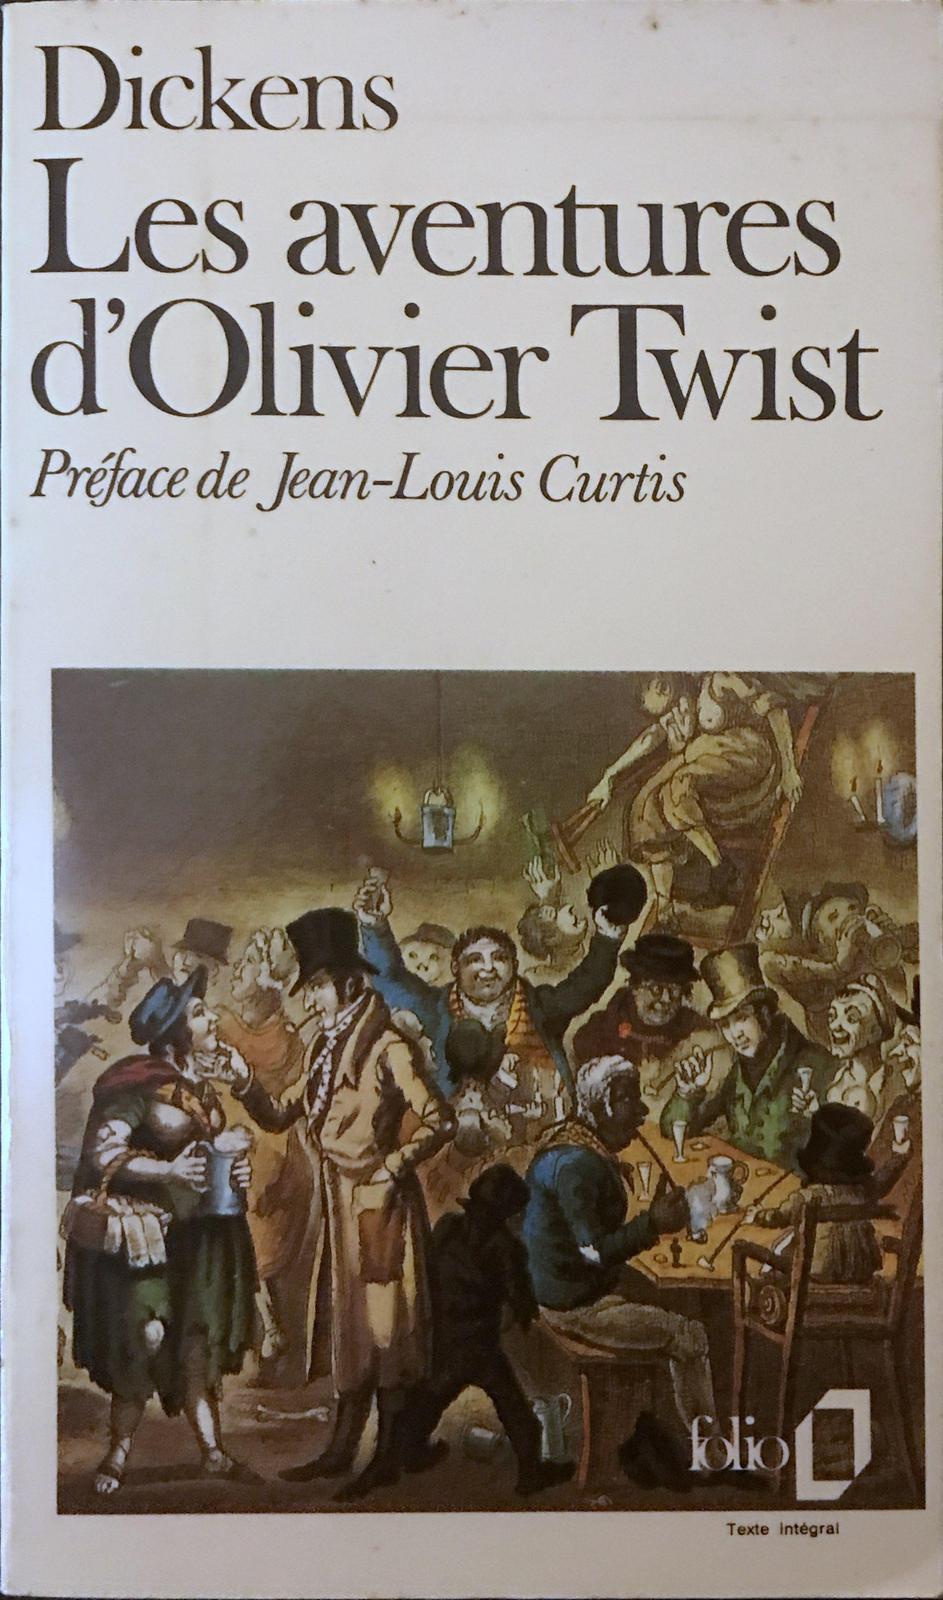 Charles Dickens: Oliver Twist (French language)